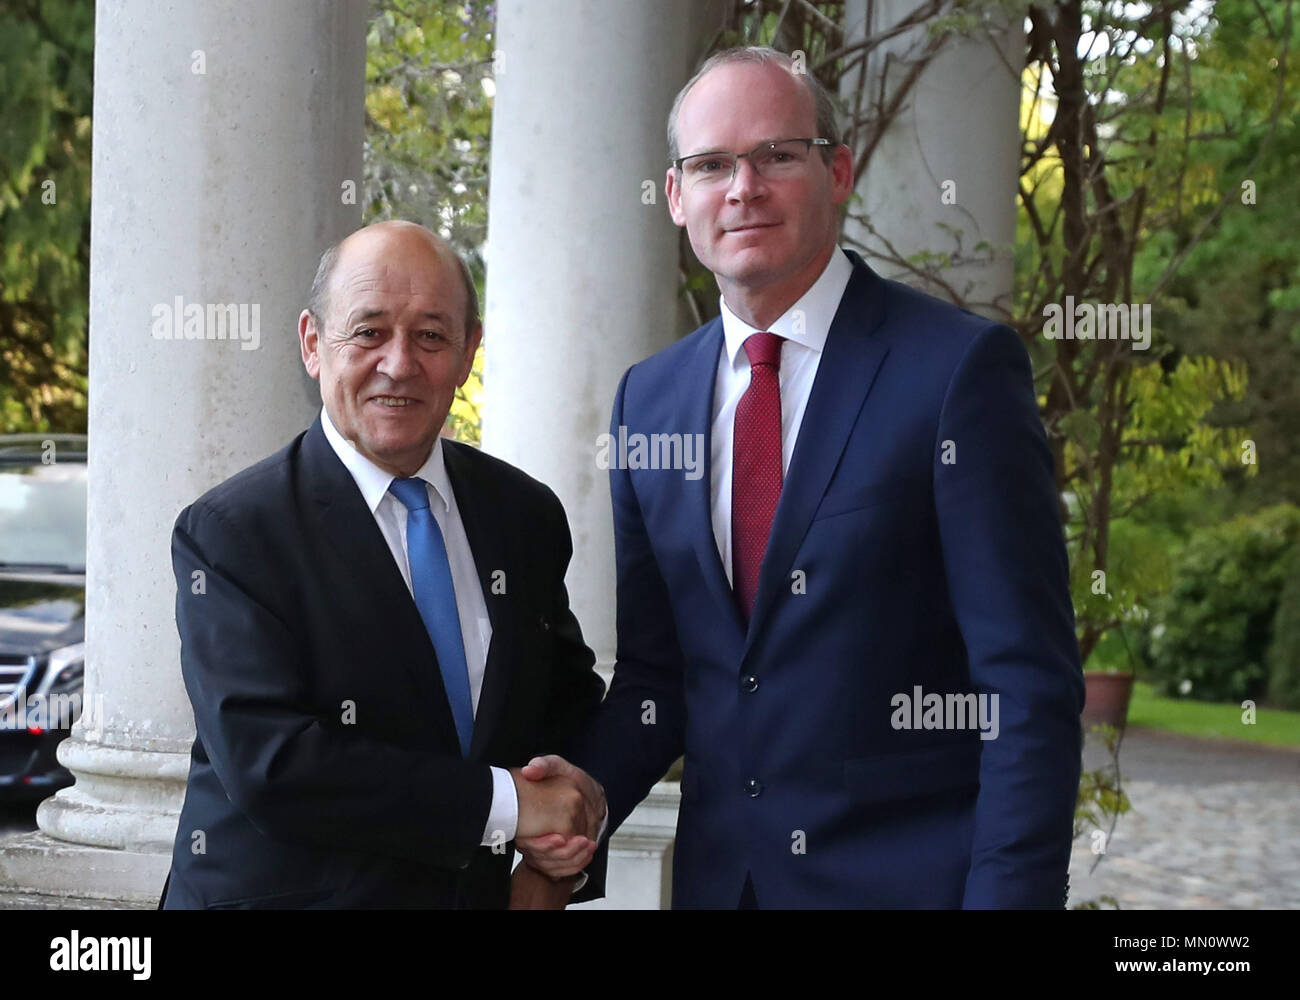 The T‡naiste and Minister for Foreign Affairs and Trade, Mr. Simon Coveney T.D (right) with French Minister for Europe and Foreign Affairs, Mr. Jean-Yves Le Drian at a meeting at Farmleigh House in Phoenix Park, Dublin . Stock Photo